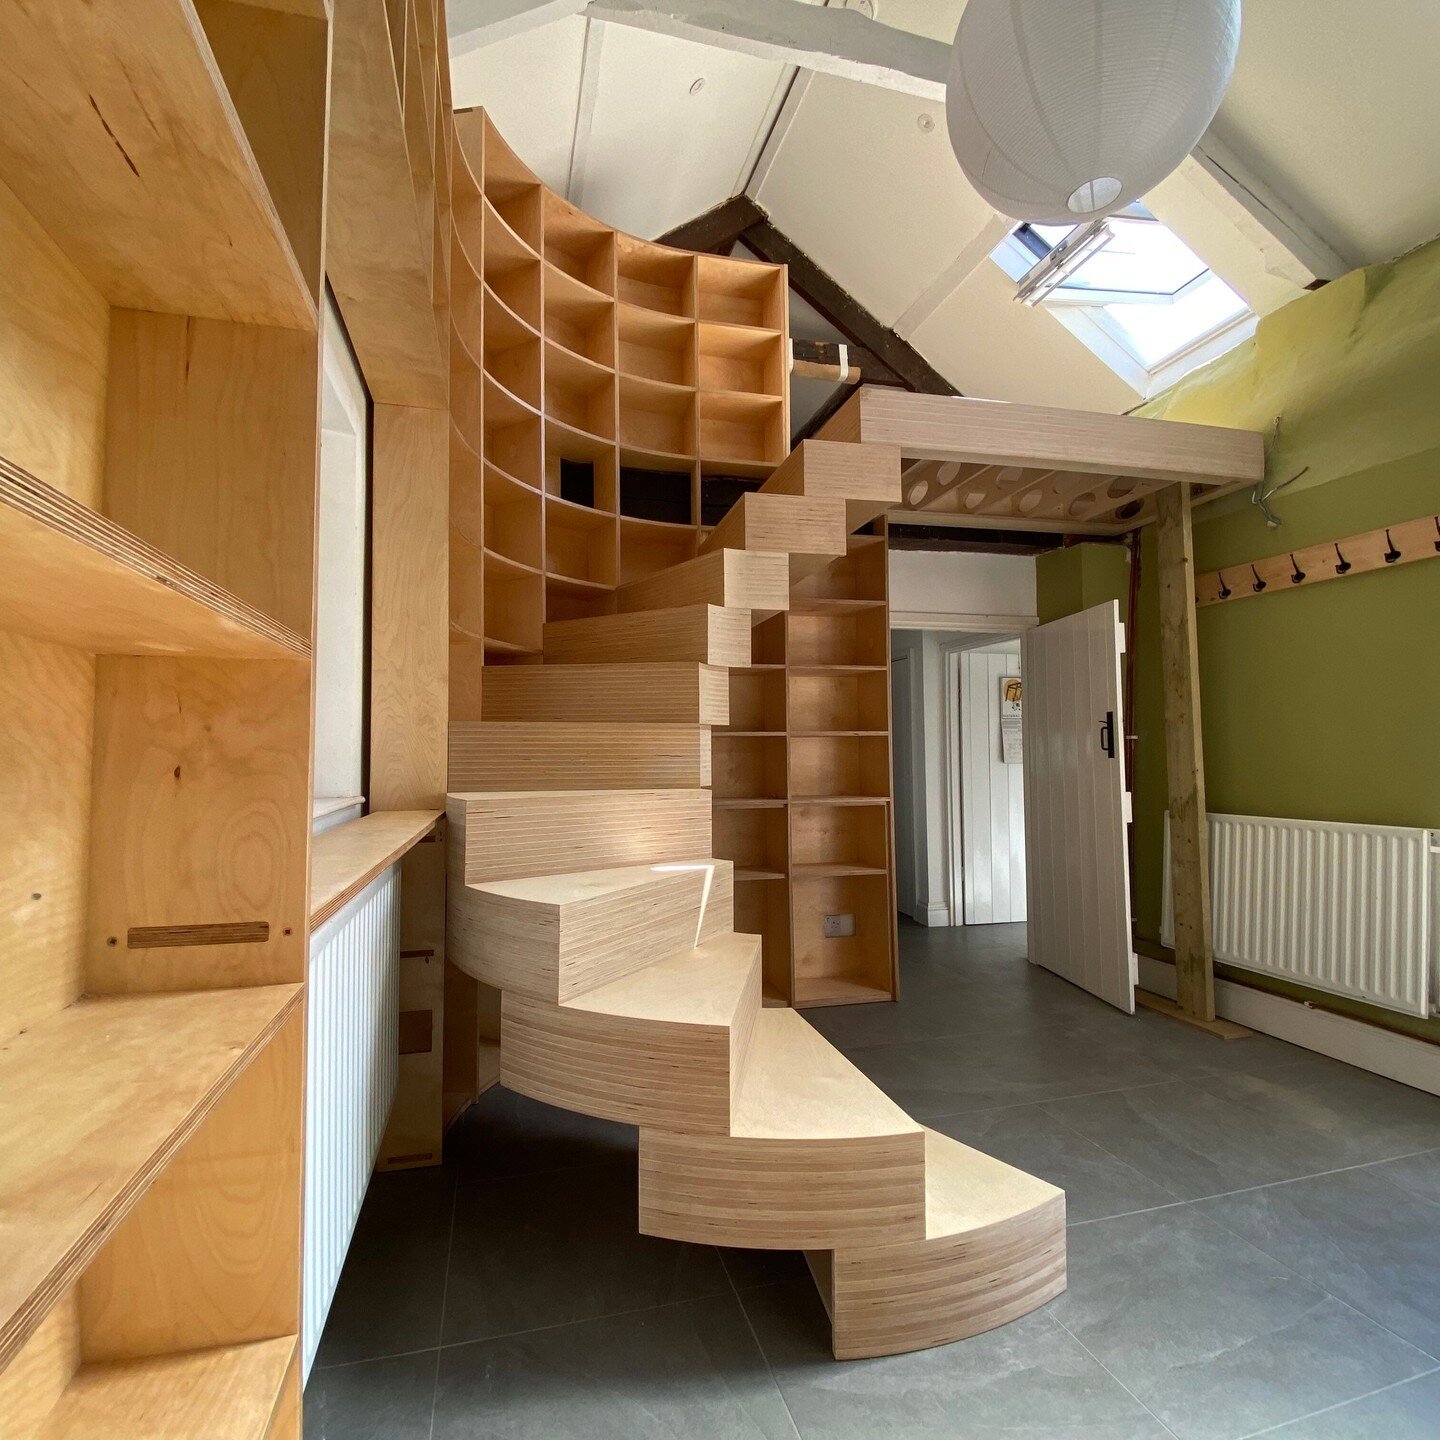 A birch plywood spiral staircase supported and cantilevered from a curved corner bookshelf.
@ammonite.designs painstakingly measured the space and designed the stairs to tie into the existing walls while remaining a free-standing structure inside a 3